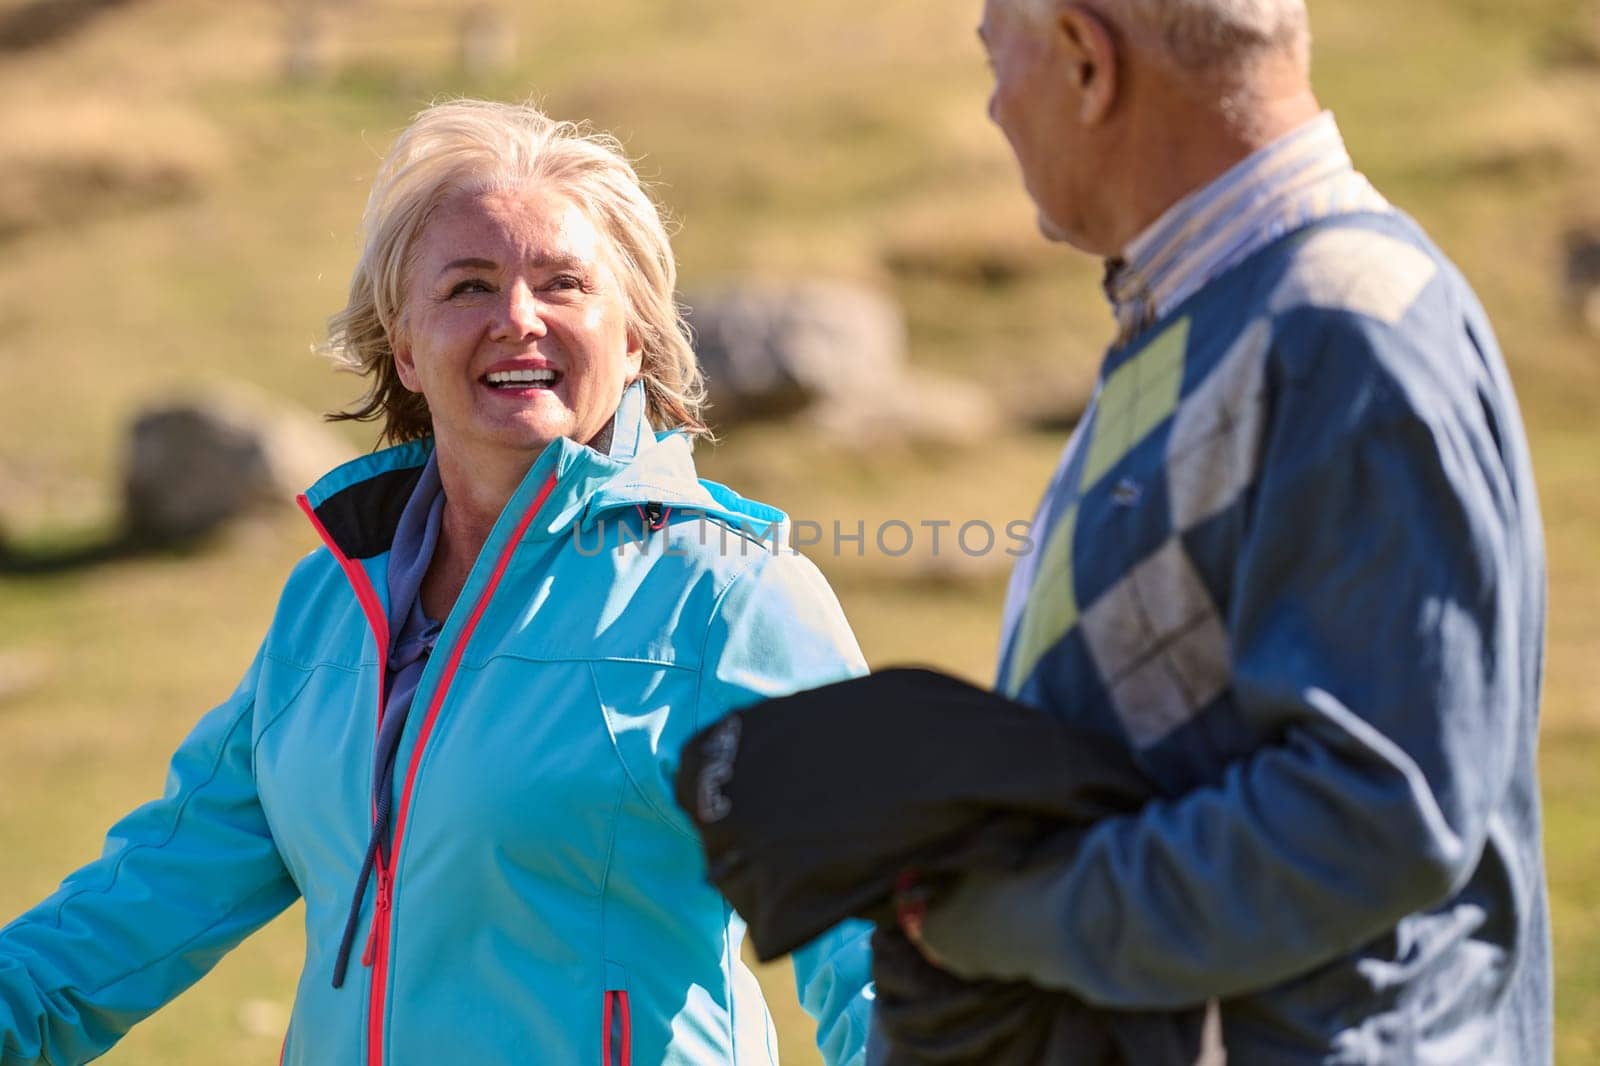 Elderly couple strolling through the breathtaking beauty of nature, maintaining their vitality and serenity, embracing the joys of a health-conscious and harmonious lifestyle.